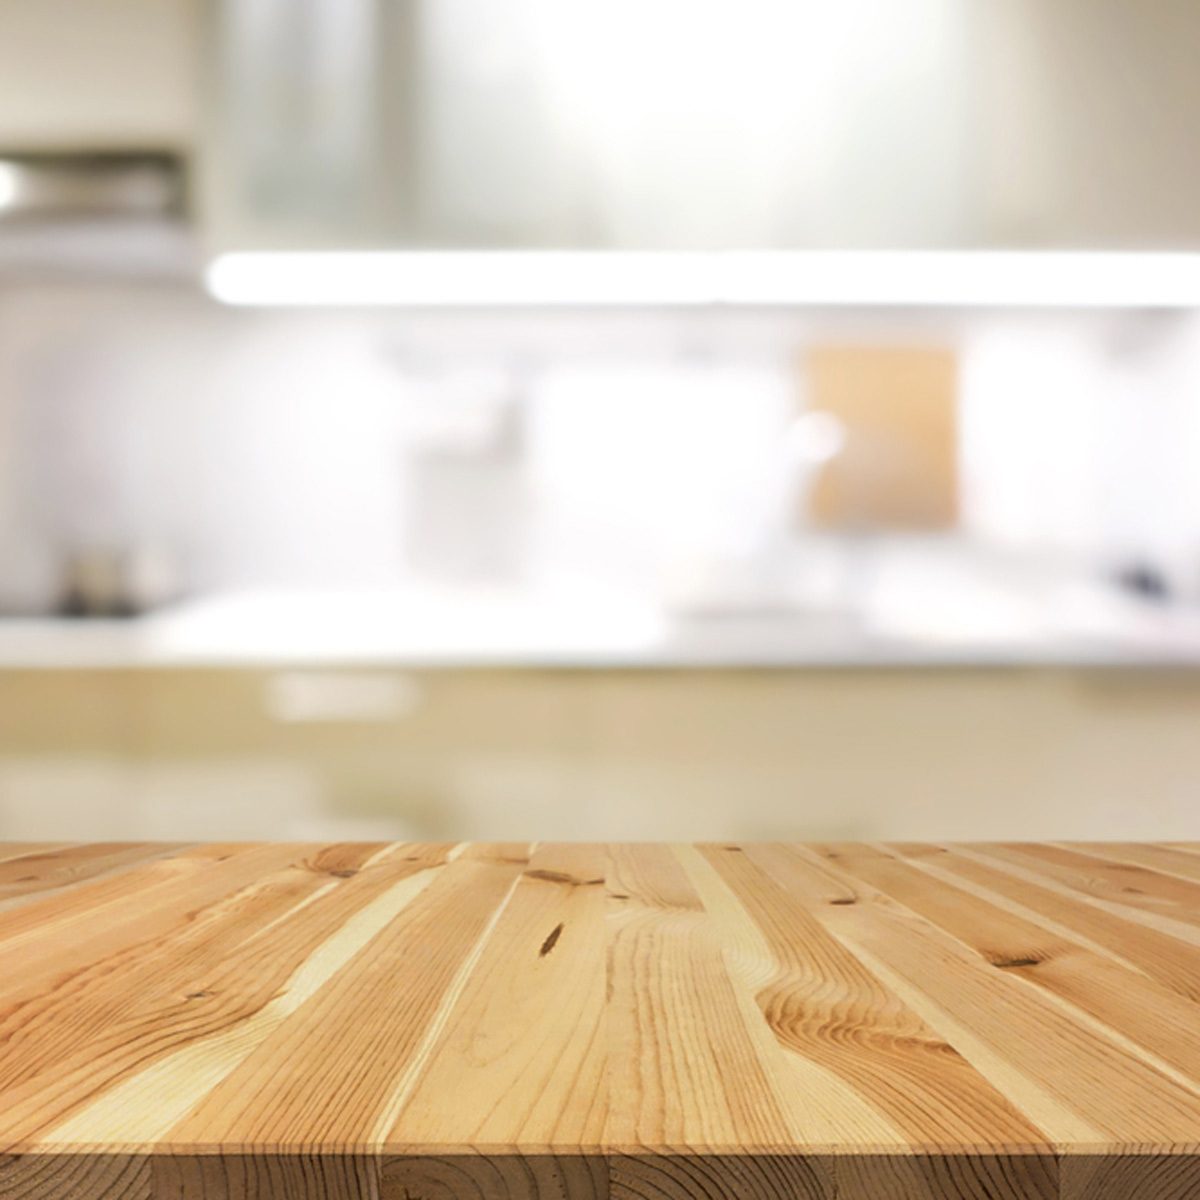 How To Clean Butcher Block Countertops, How To Remove Water Stains From Butcher Block Countertop